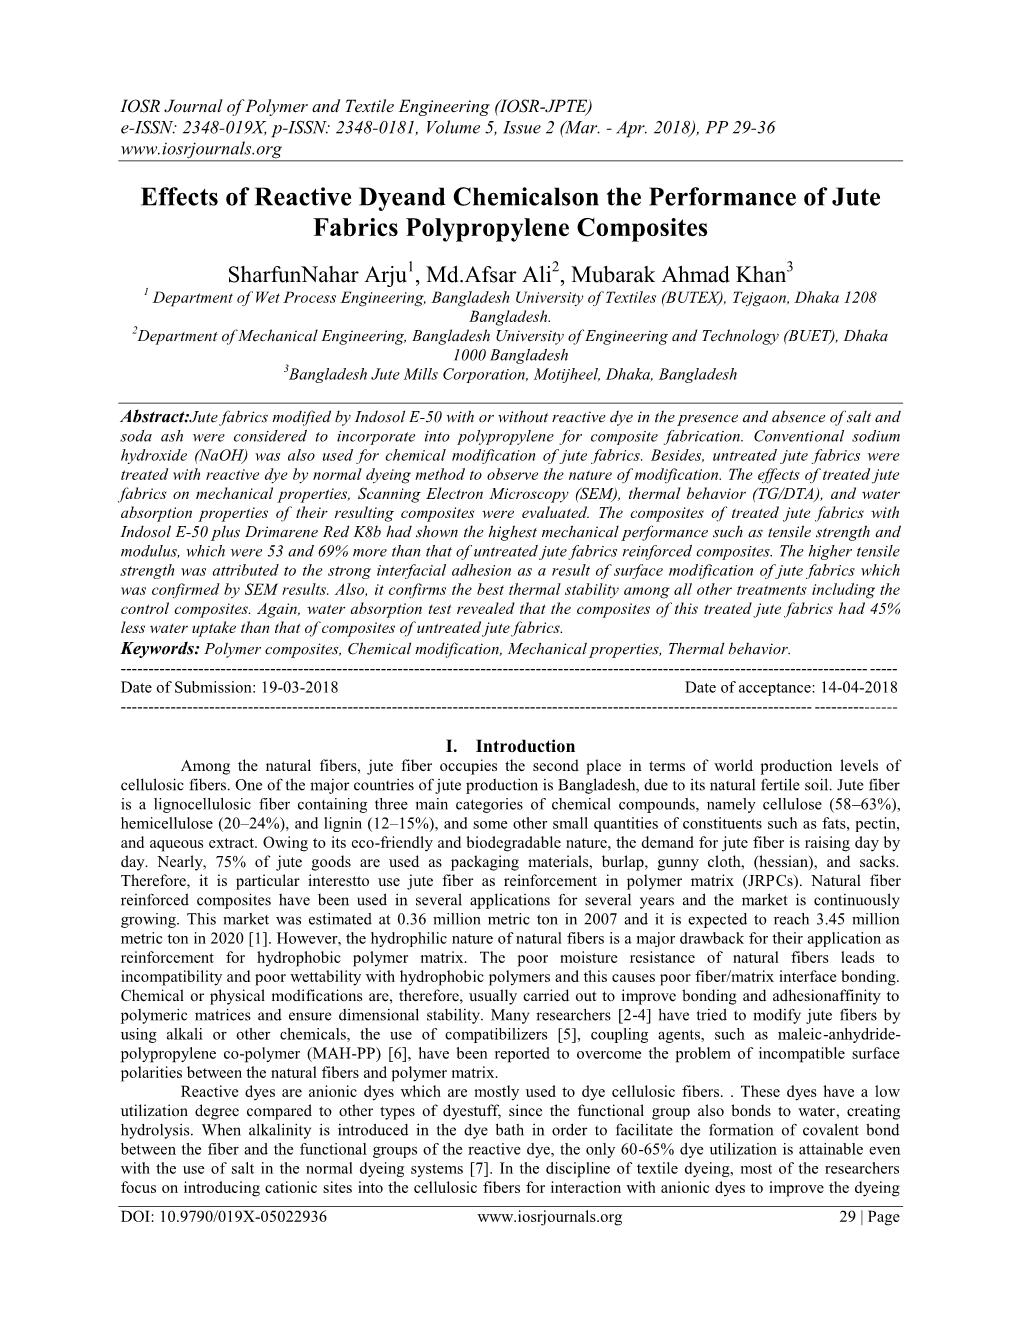 Effects of Reactive Dyeand Chemicalson the Performance of Jute Fabrics Polypropylene Composites